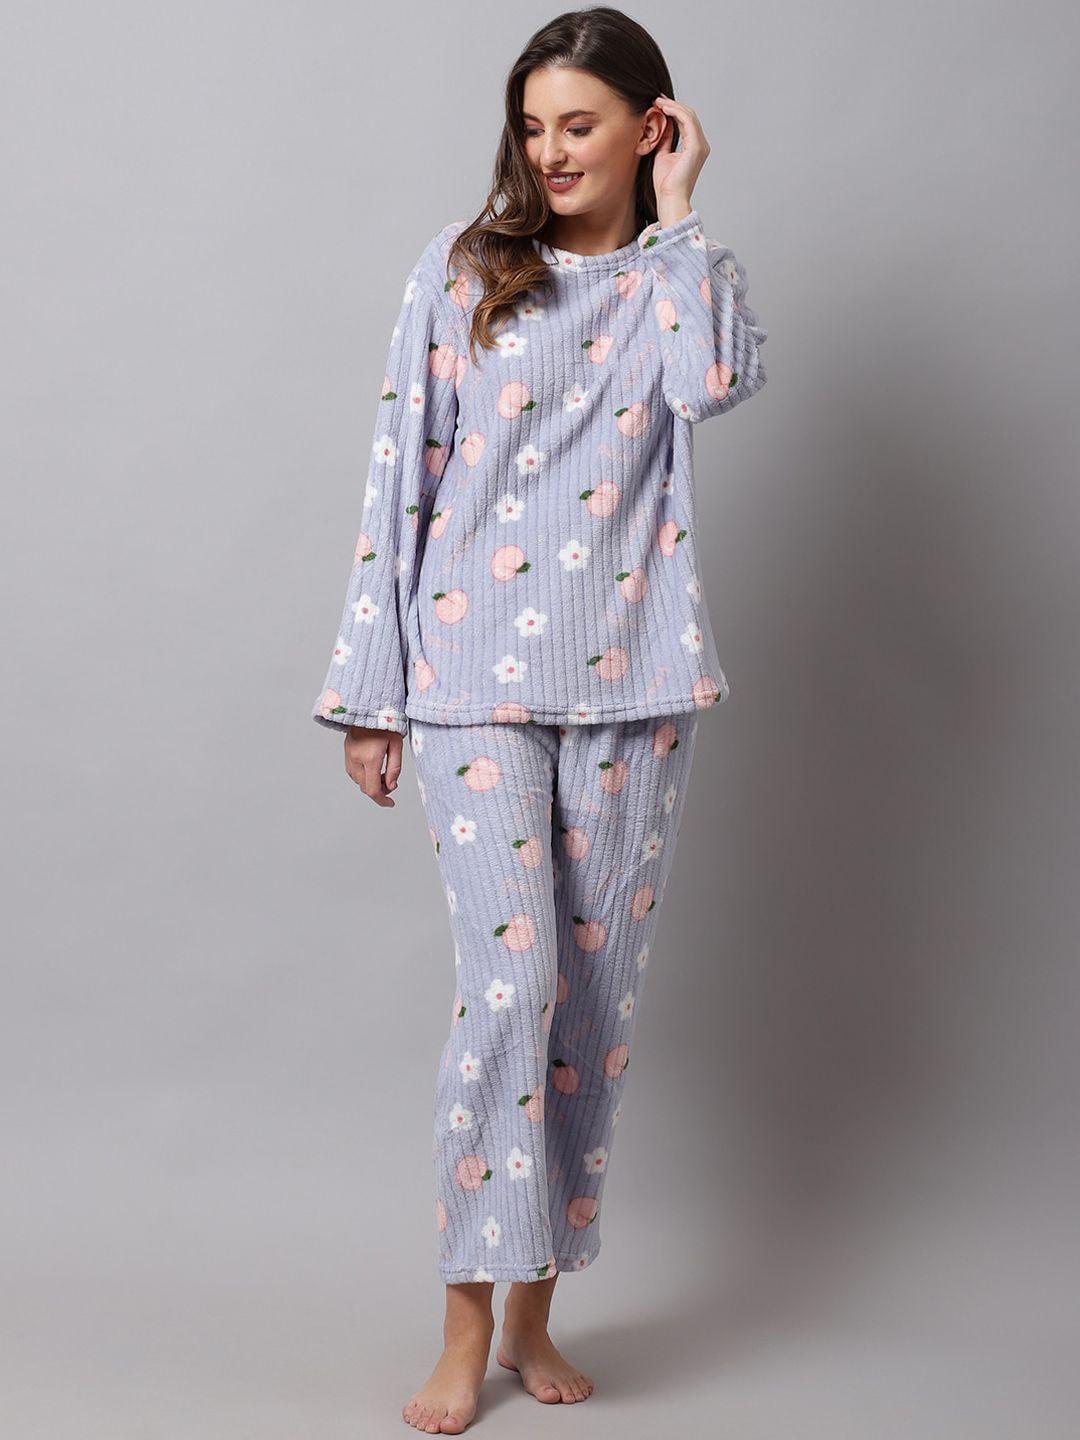 tag 7 women blue & white printed night suit